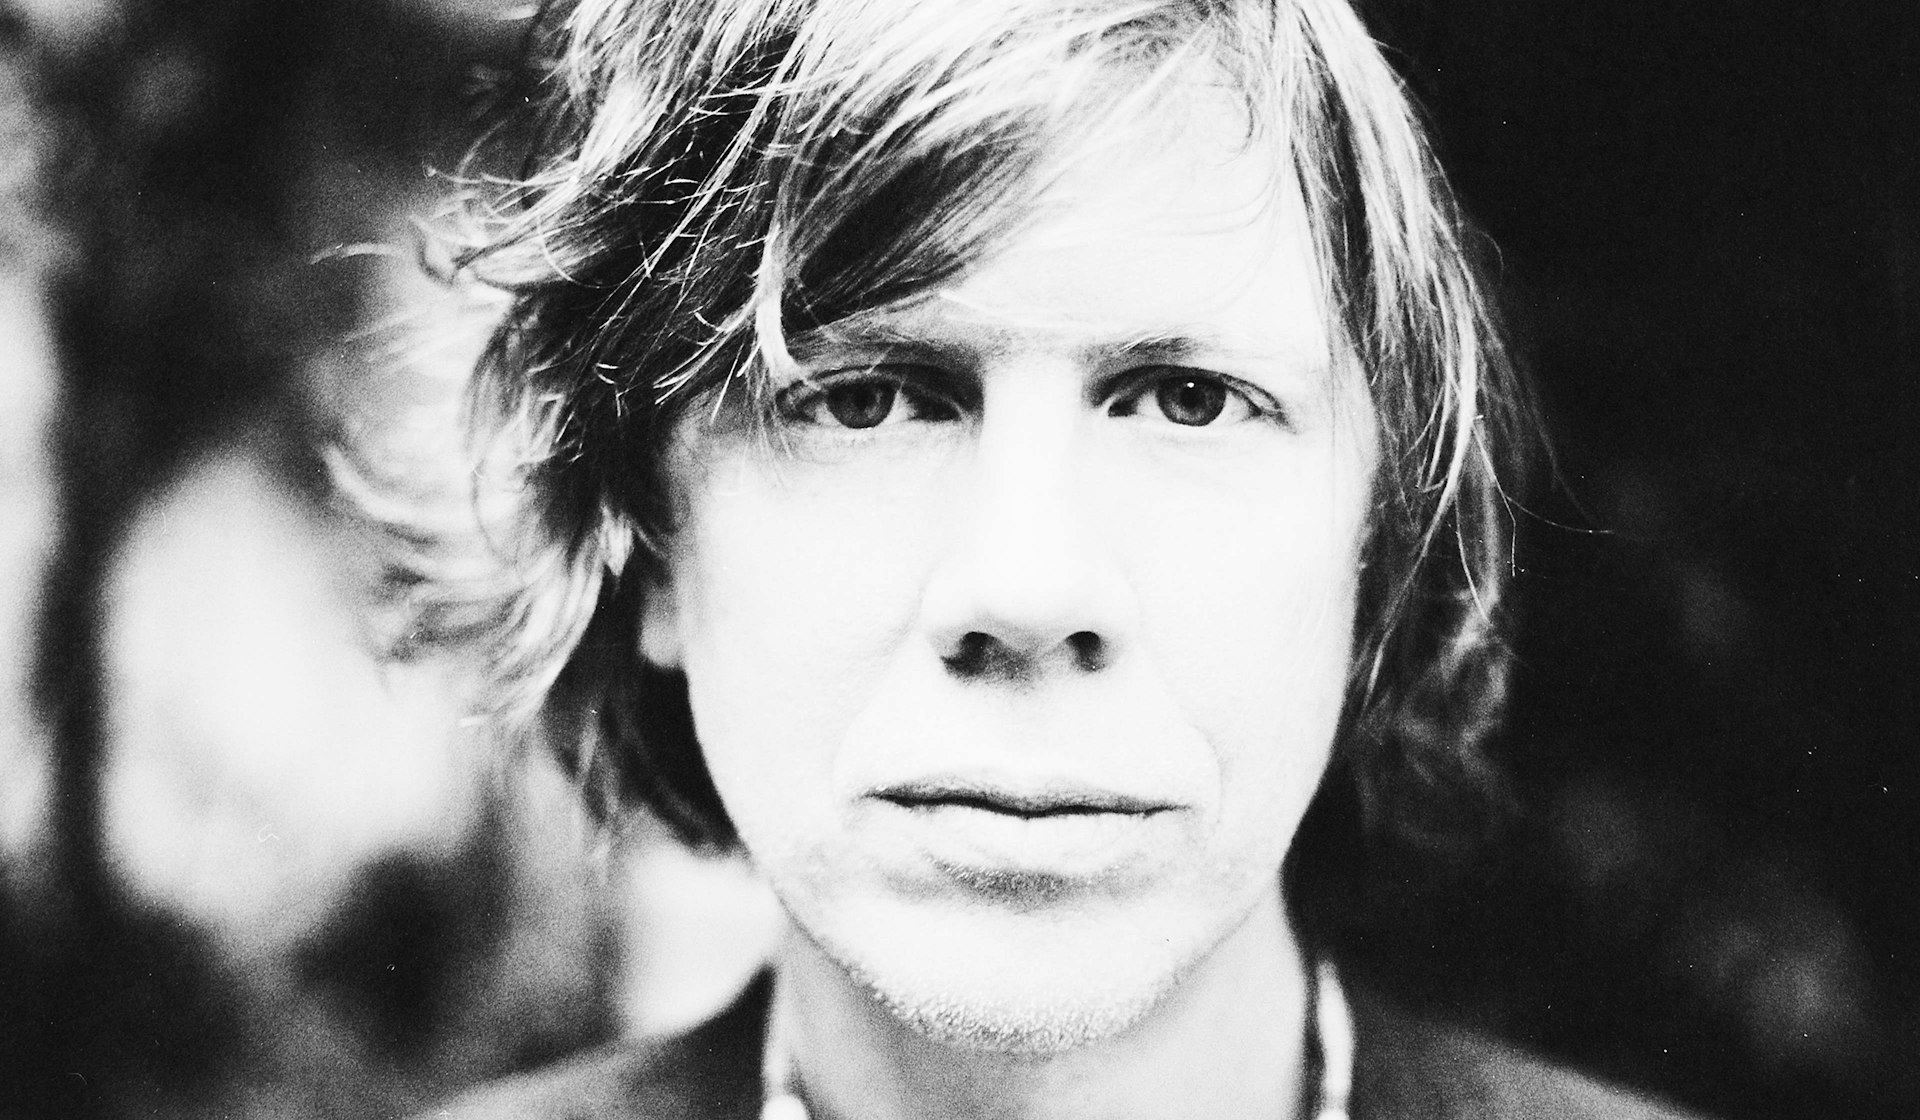 For Thurston Moore, community is everything